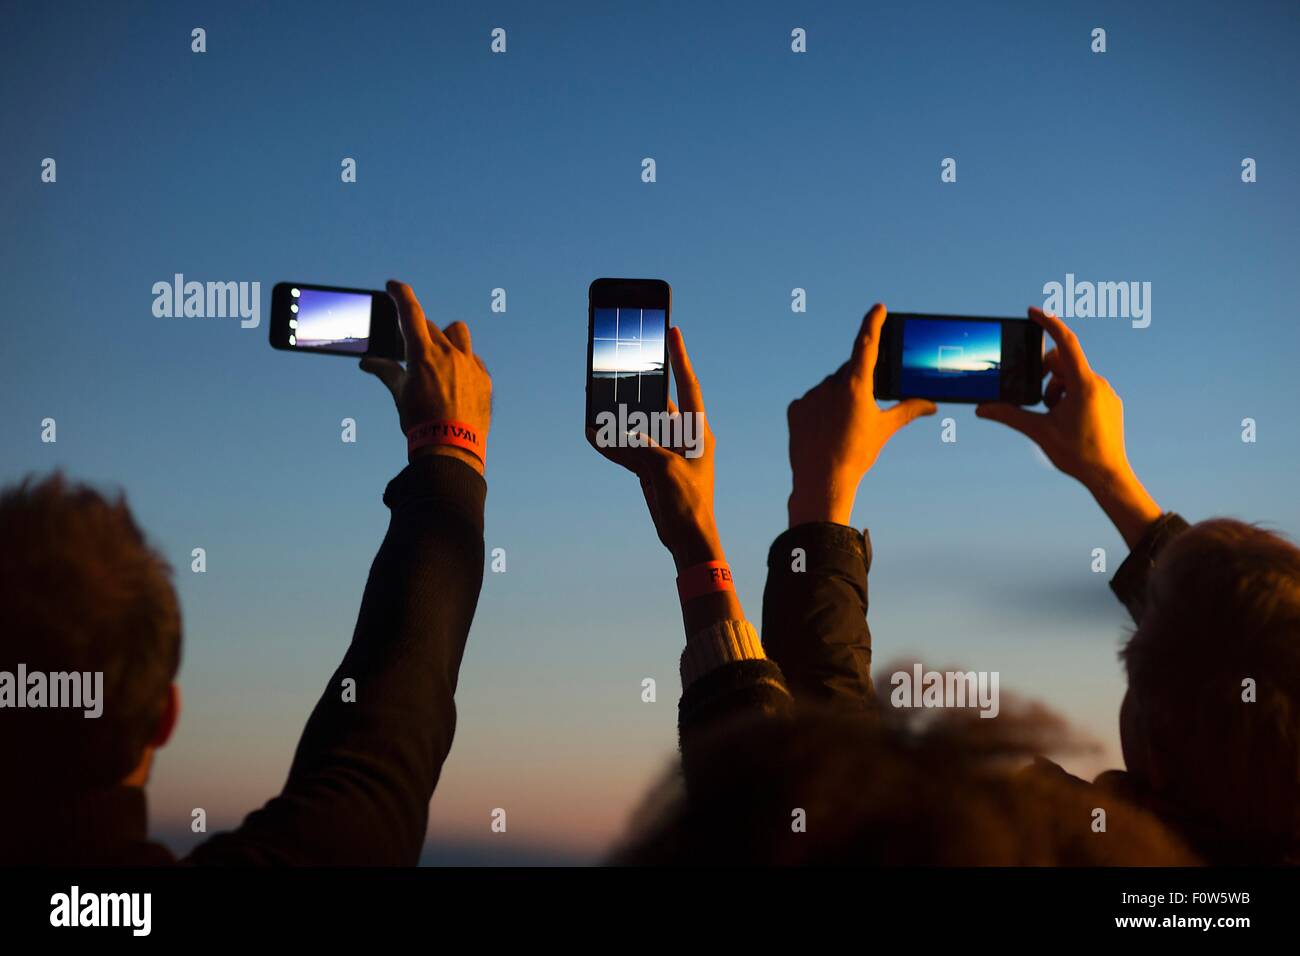 Friends taking photograph with smartphone at dusk Stock Photo